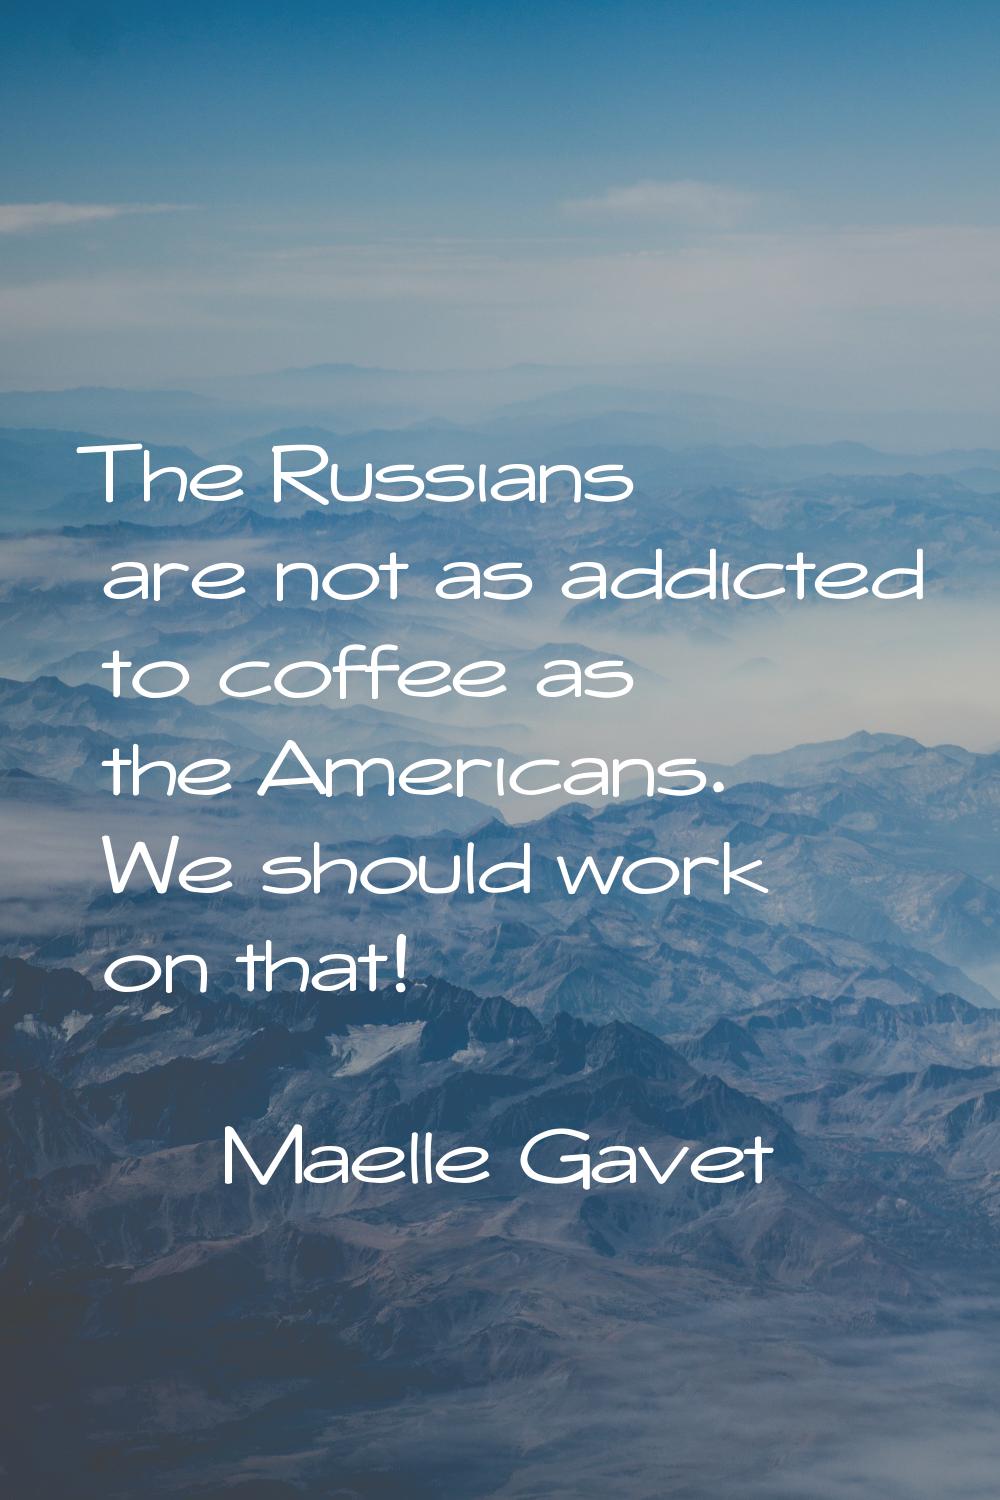 The Russians are not as addicted to coffee as the Americans. We should work on that!